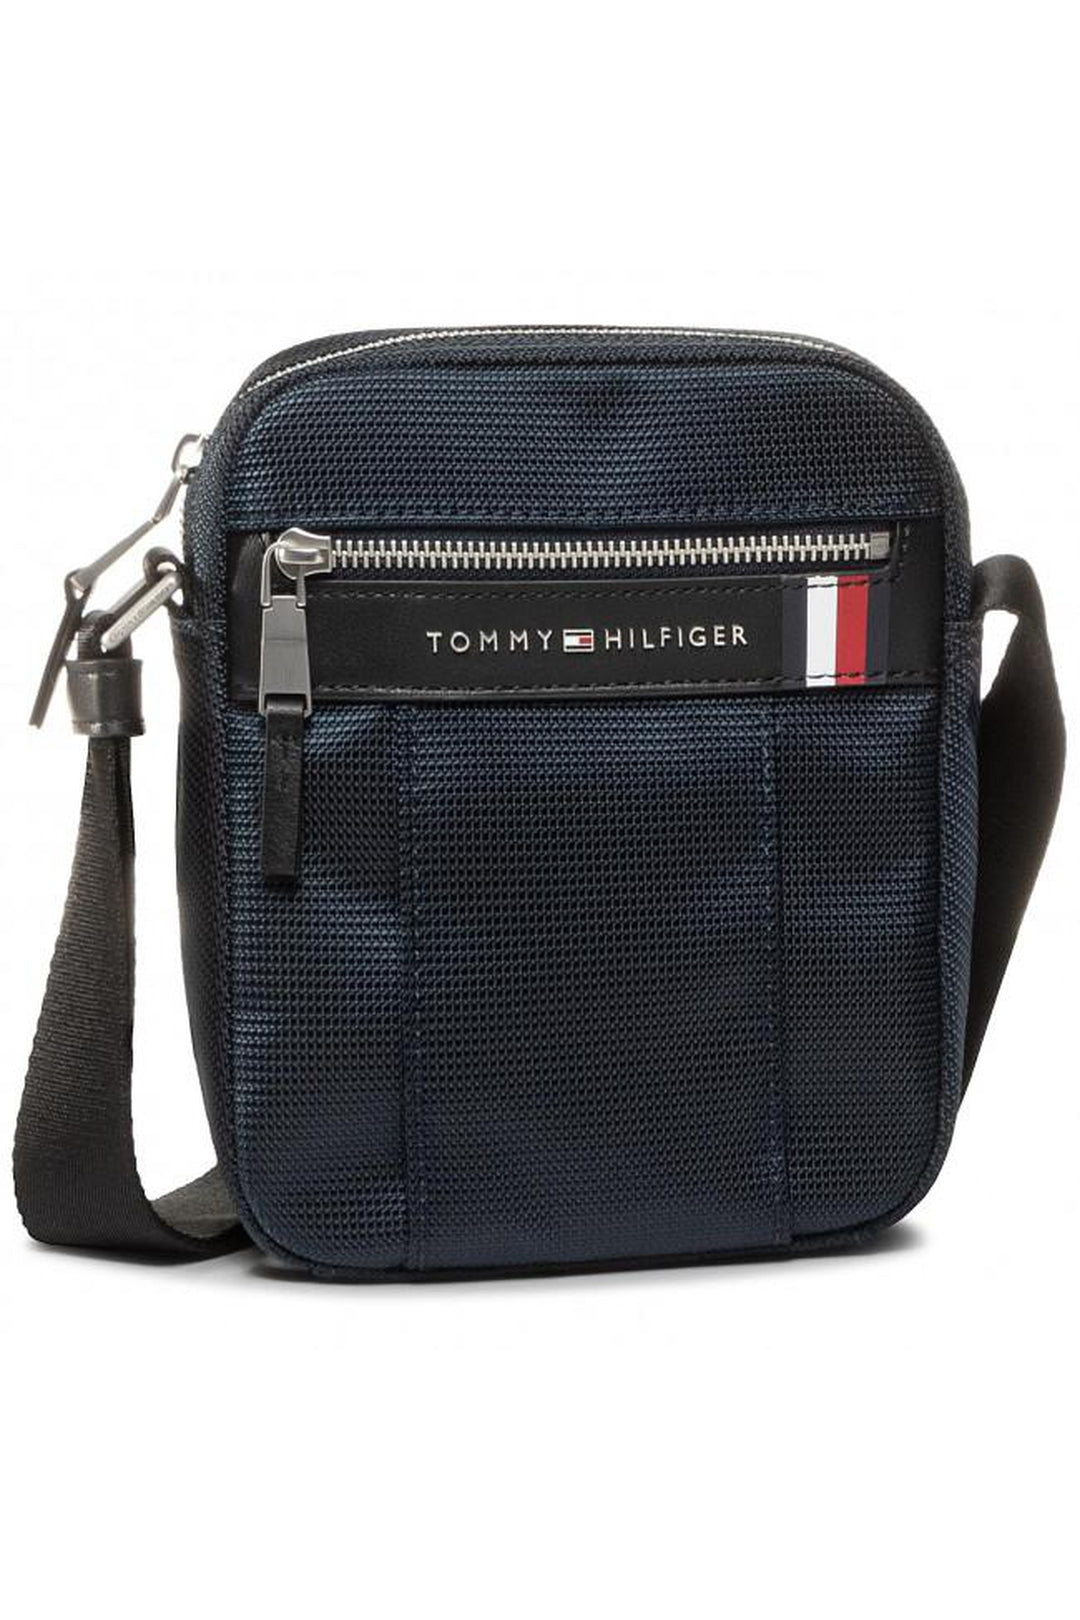 tommy hilfiger elevated mini reporter